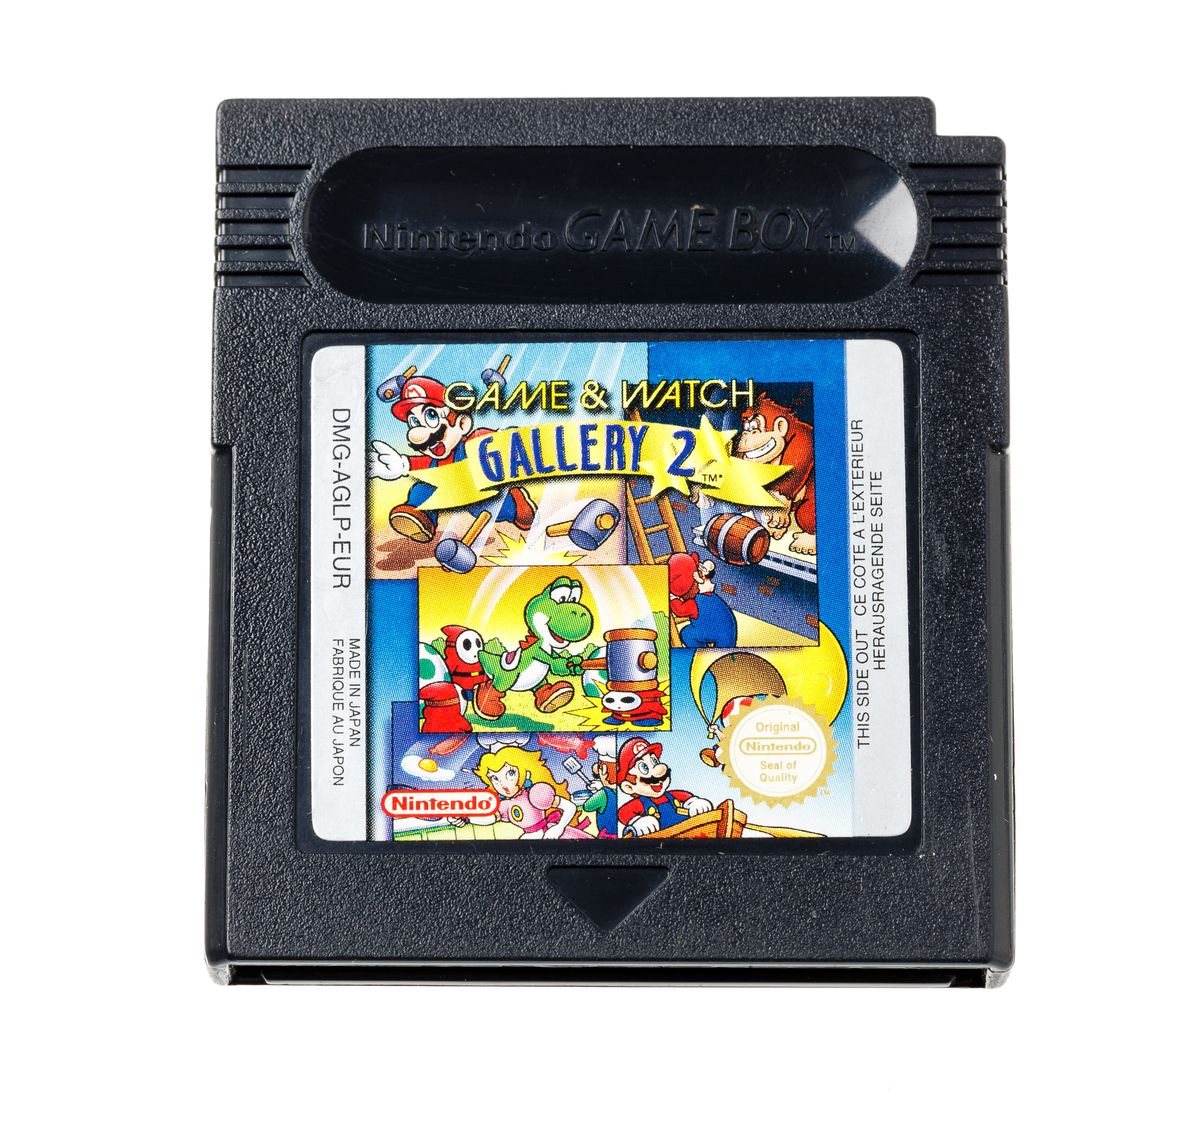 Game & Watch Gallery 2 | Gameboy Color Games | RetroNintendoKopen.nl